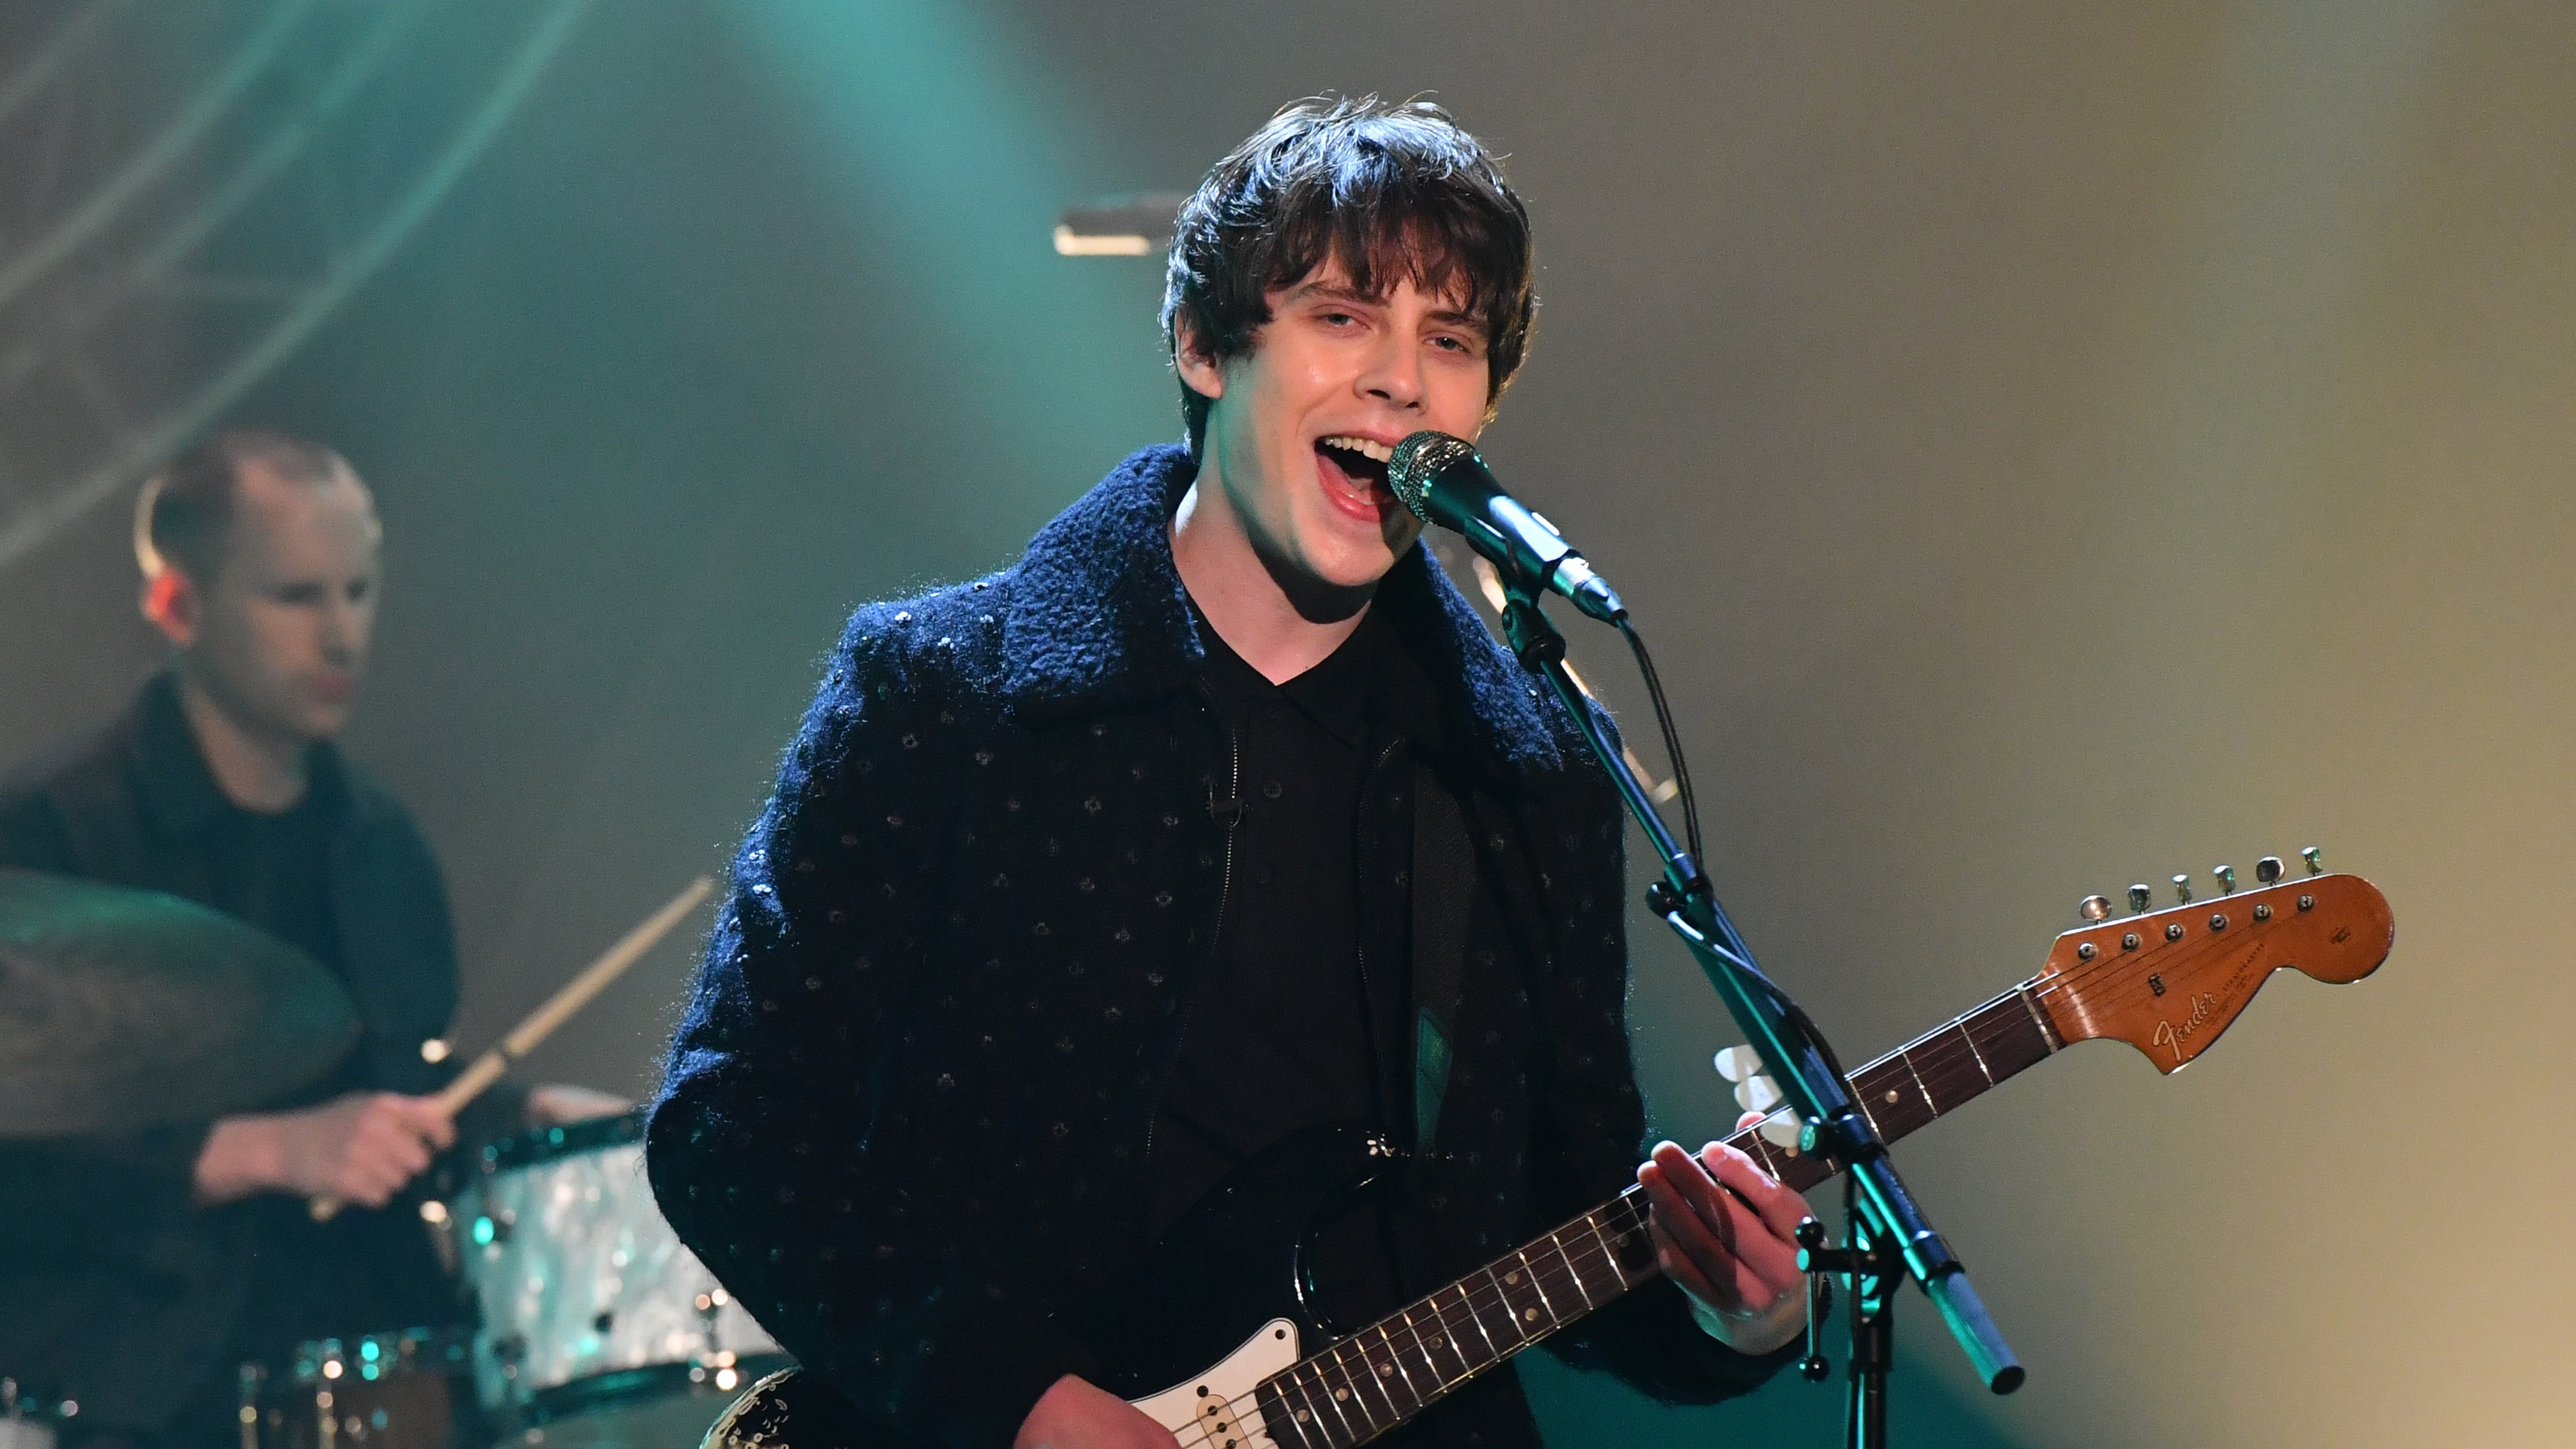 Nottingham's Jake Bugg for gig and shows us around town | ITV News Central